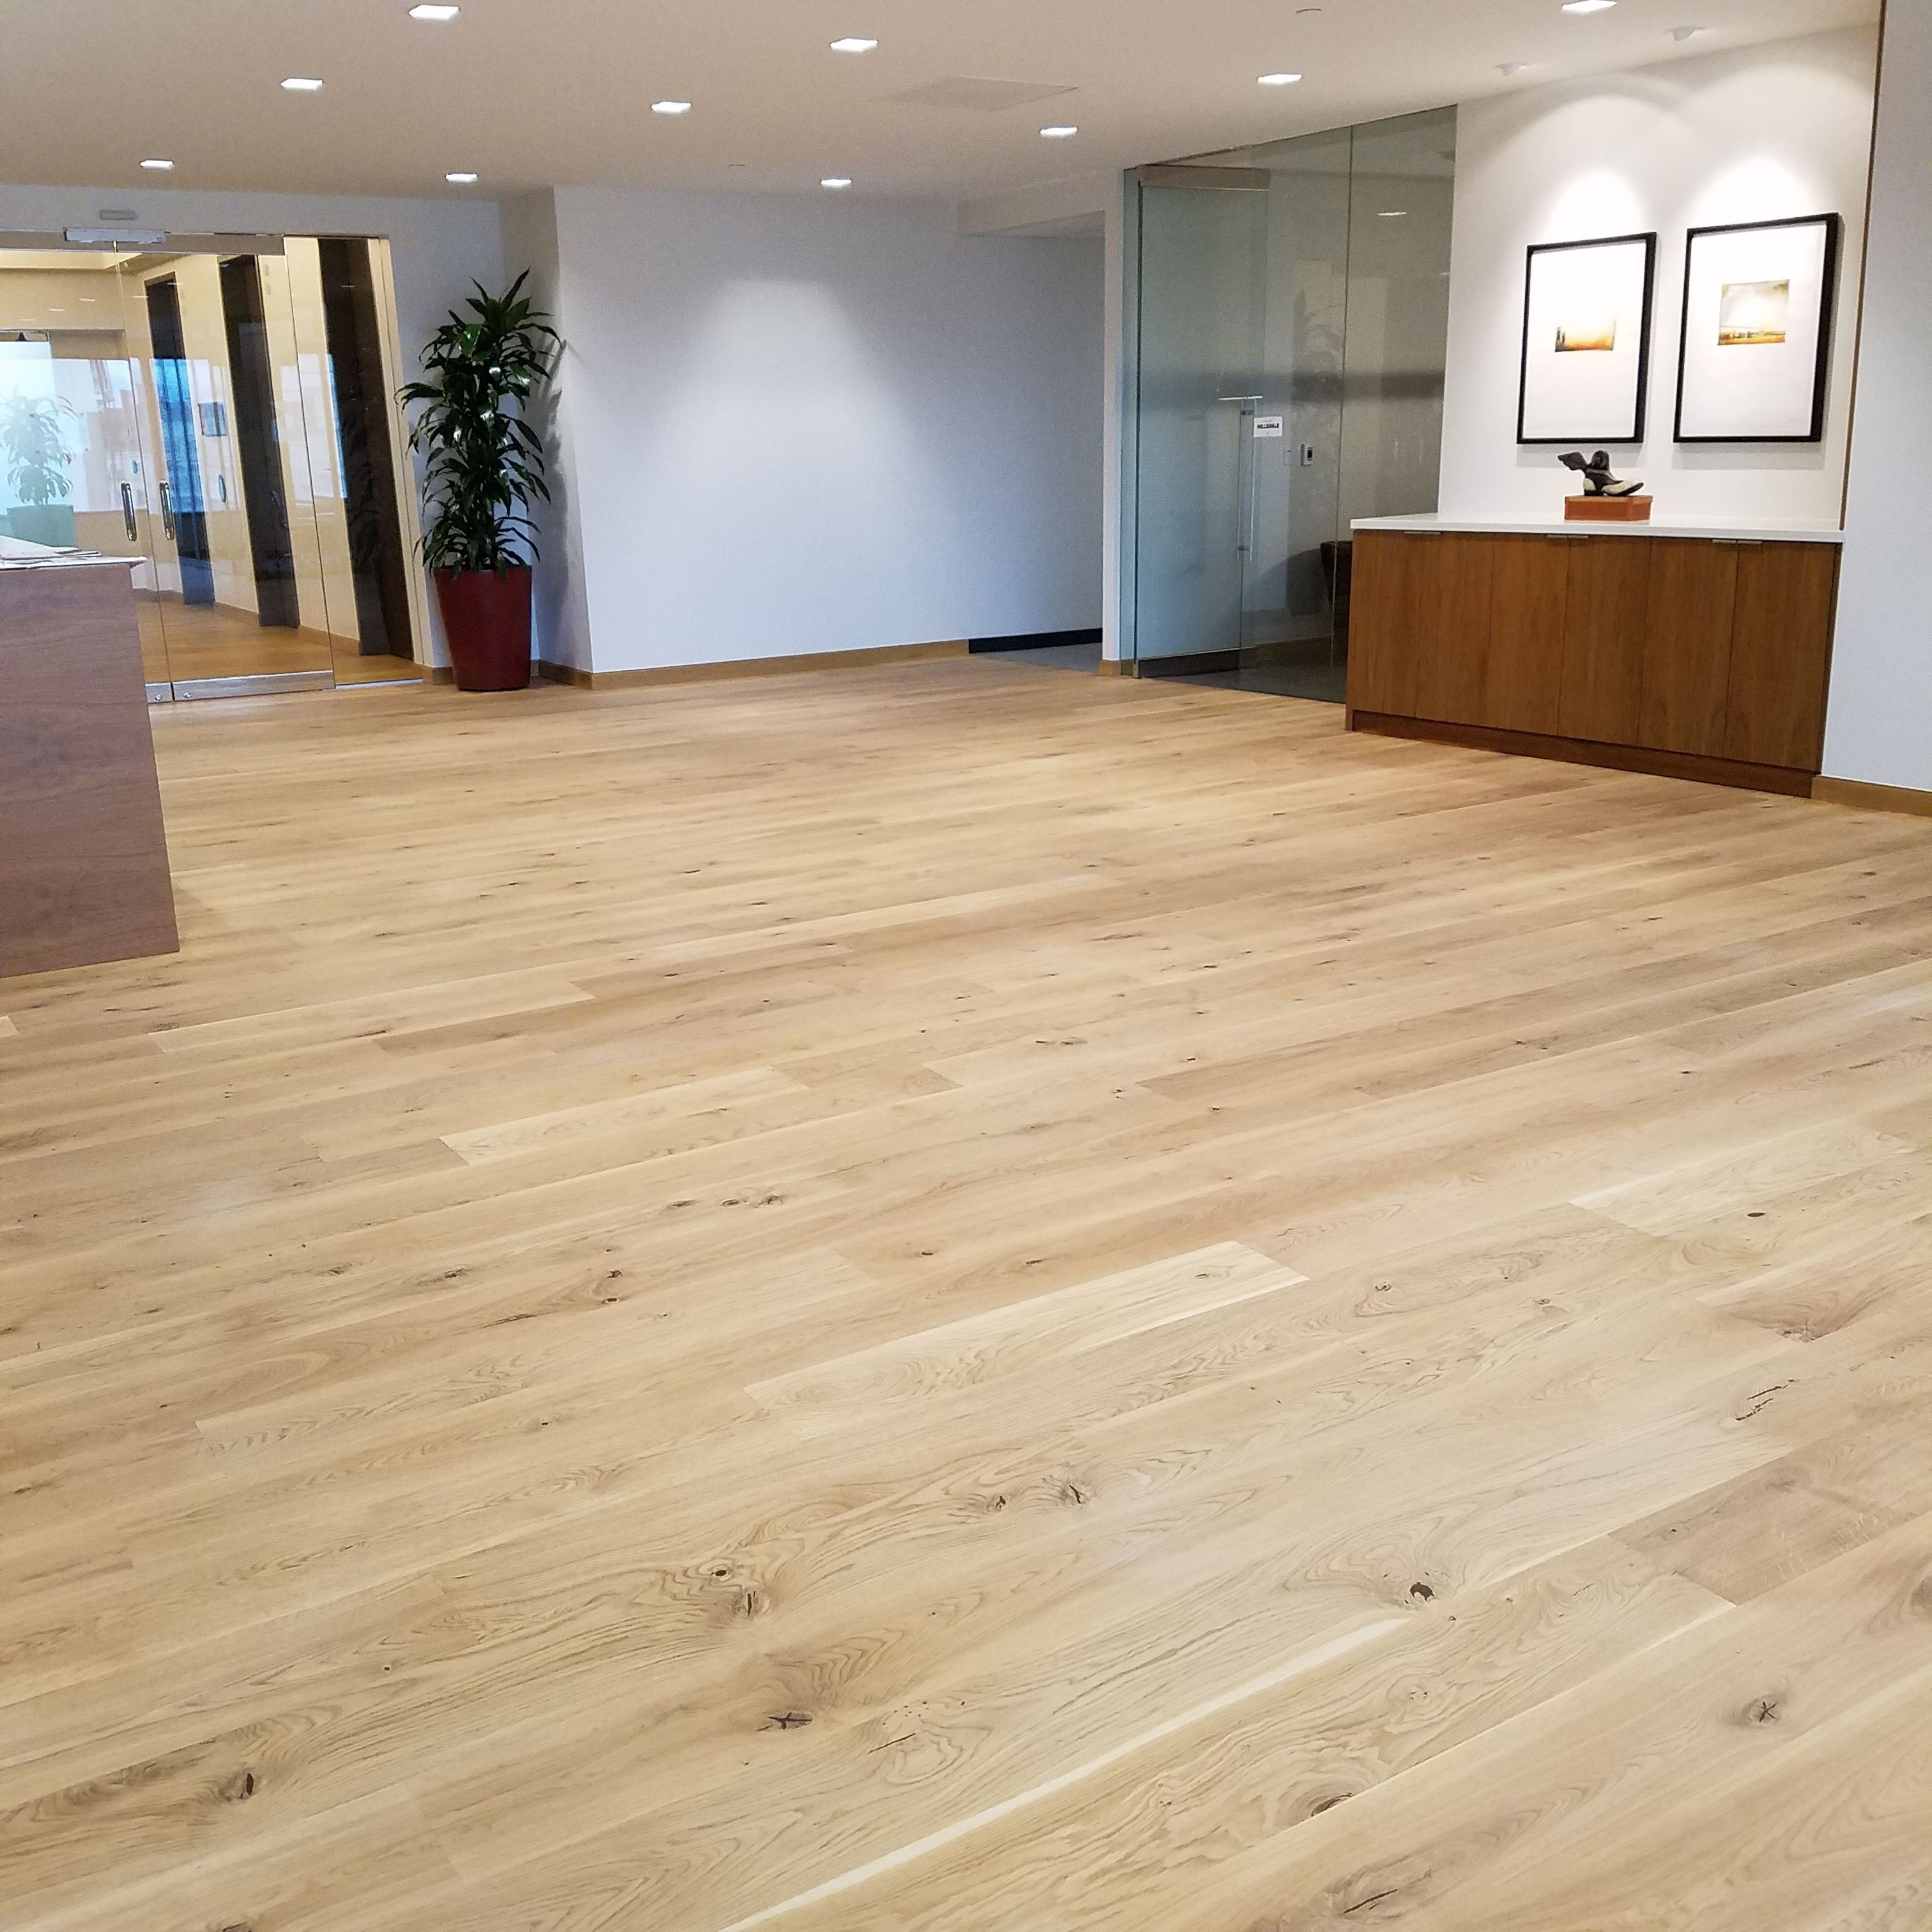 custom hardwood floor patterns of castlebespokeflooring gracing this modern looking office space be with be it for a professional office space or a residence these 8 wide hardwood planks can be lightly sanded coated and custom pre finished as per